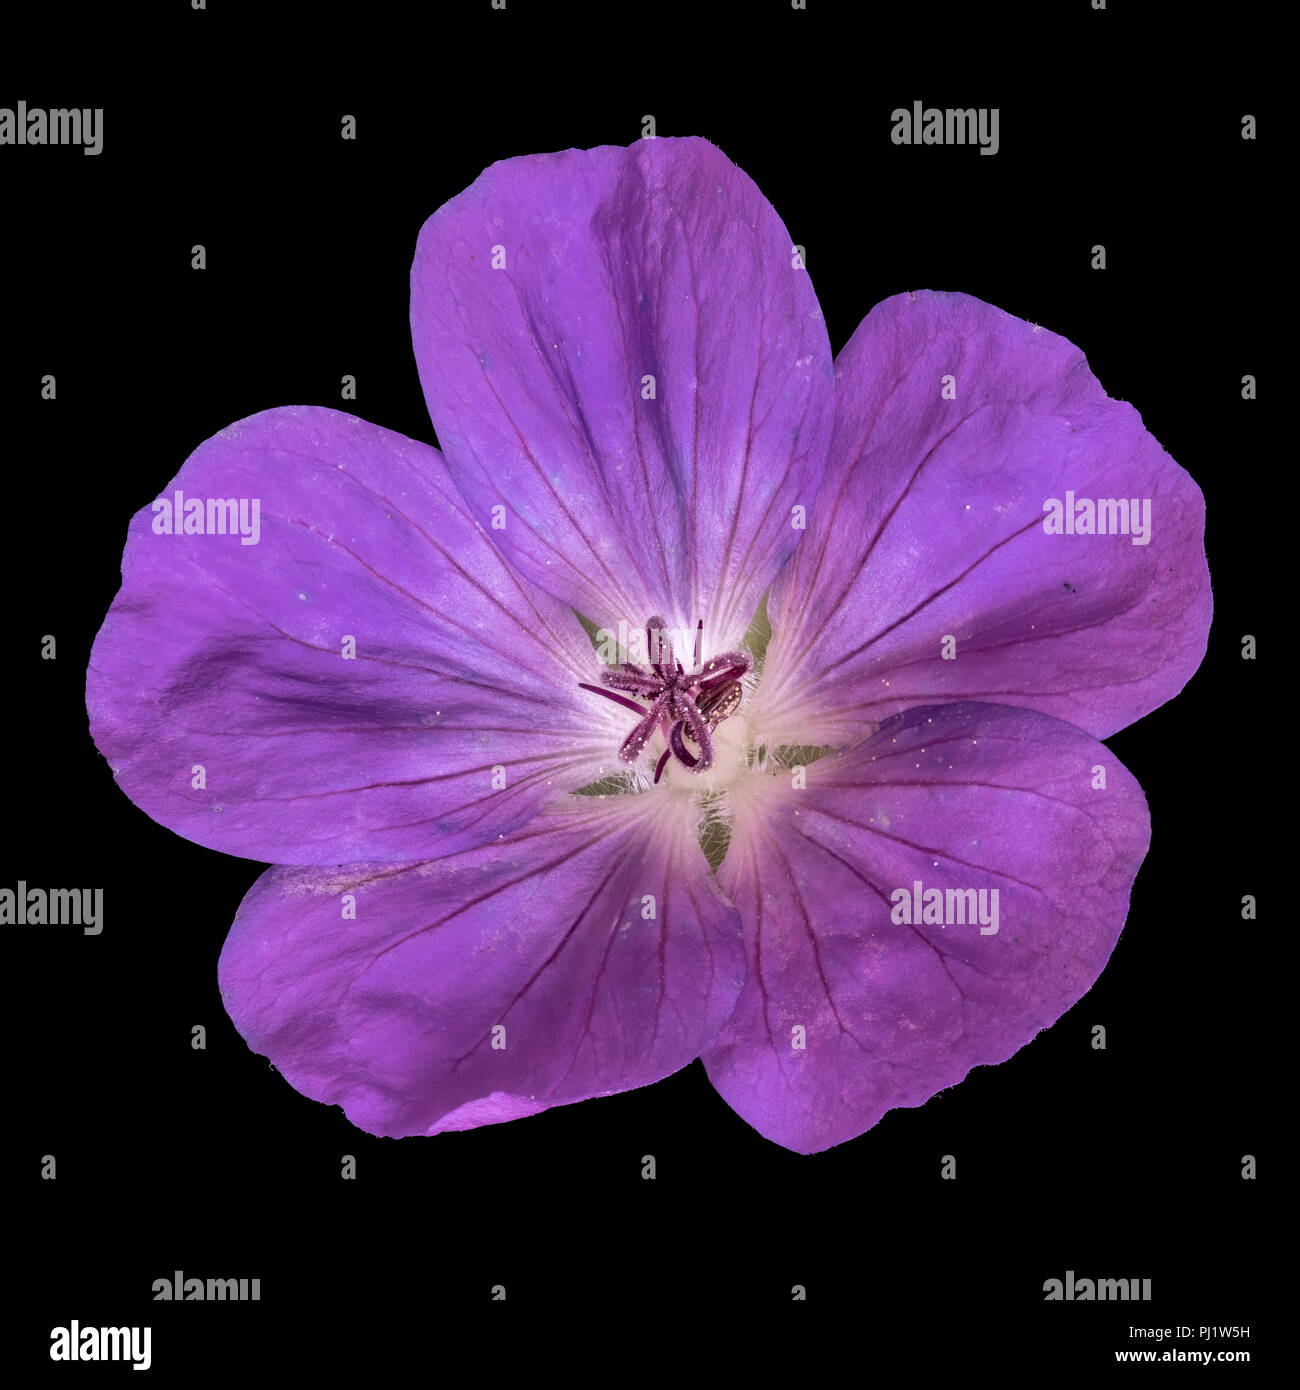 Fine art still life color floral image of a single isolated wide open violet blooming female geranium / cranesbill flower ,black background,ivintage Stock Photo